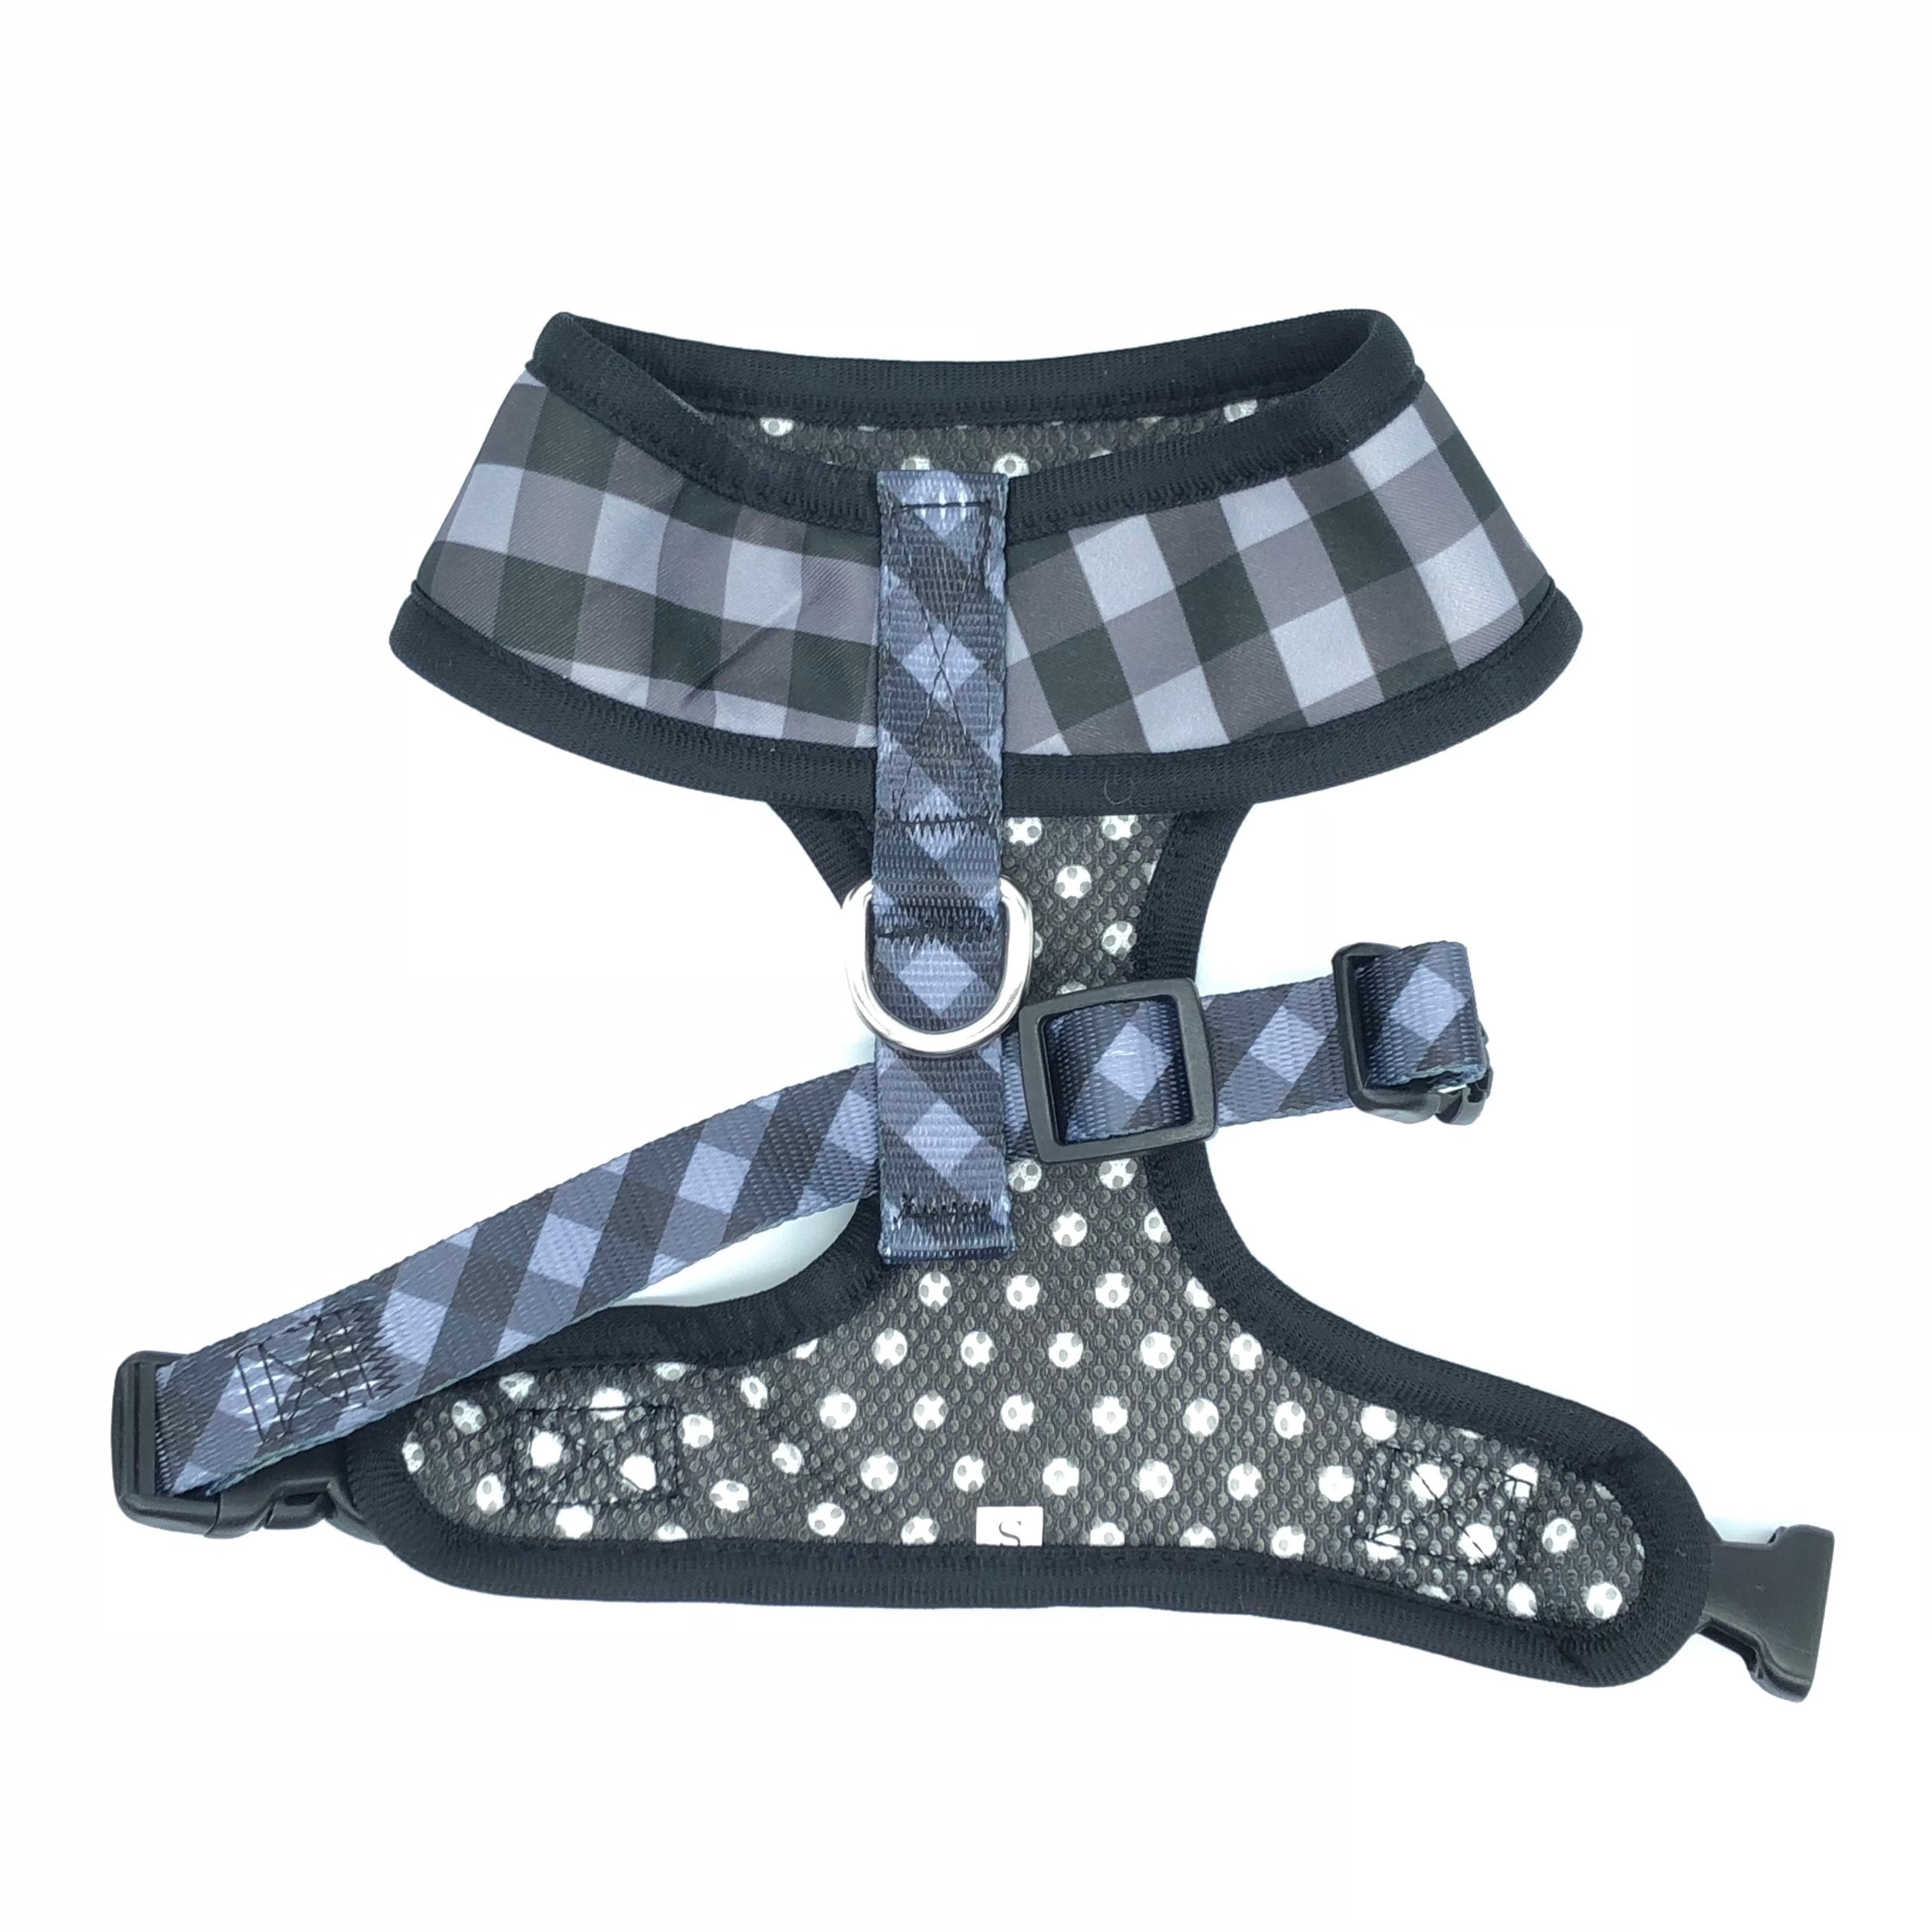 SOAPY MOOSE - The Manhattan Reversible Dog Harness